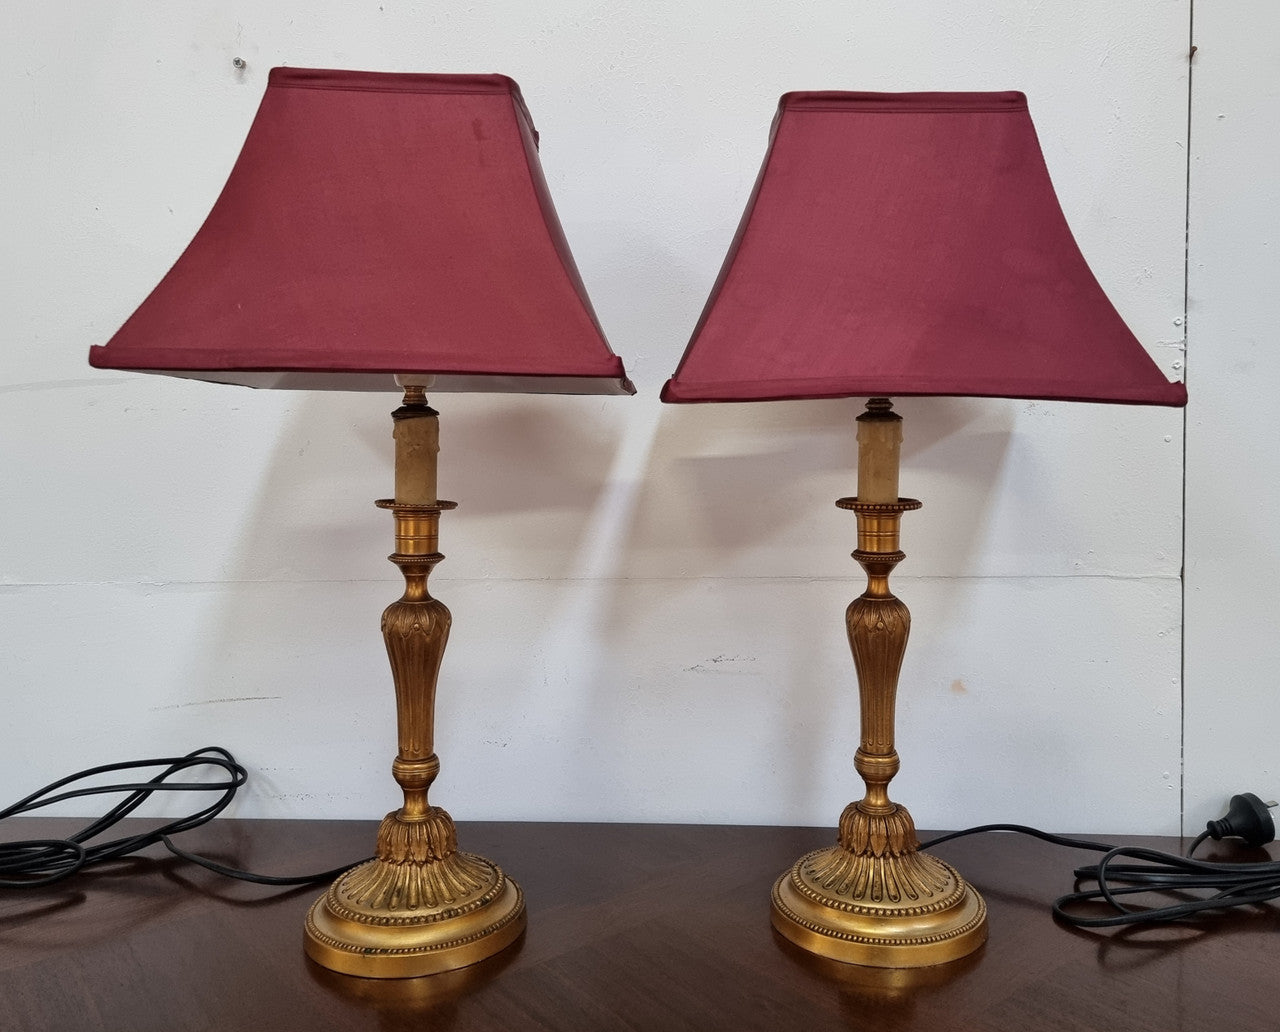 Pair of French Antique 19th Century Gilt Bronze Candlestick Lamps & Shades